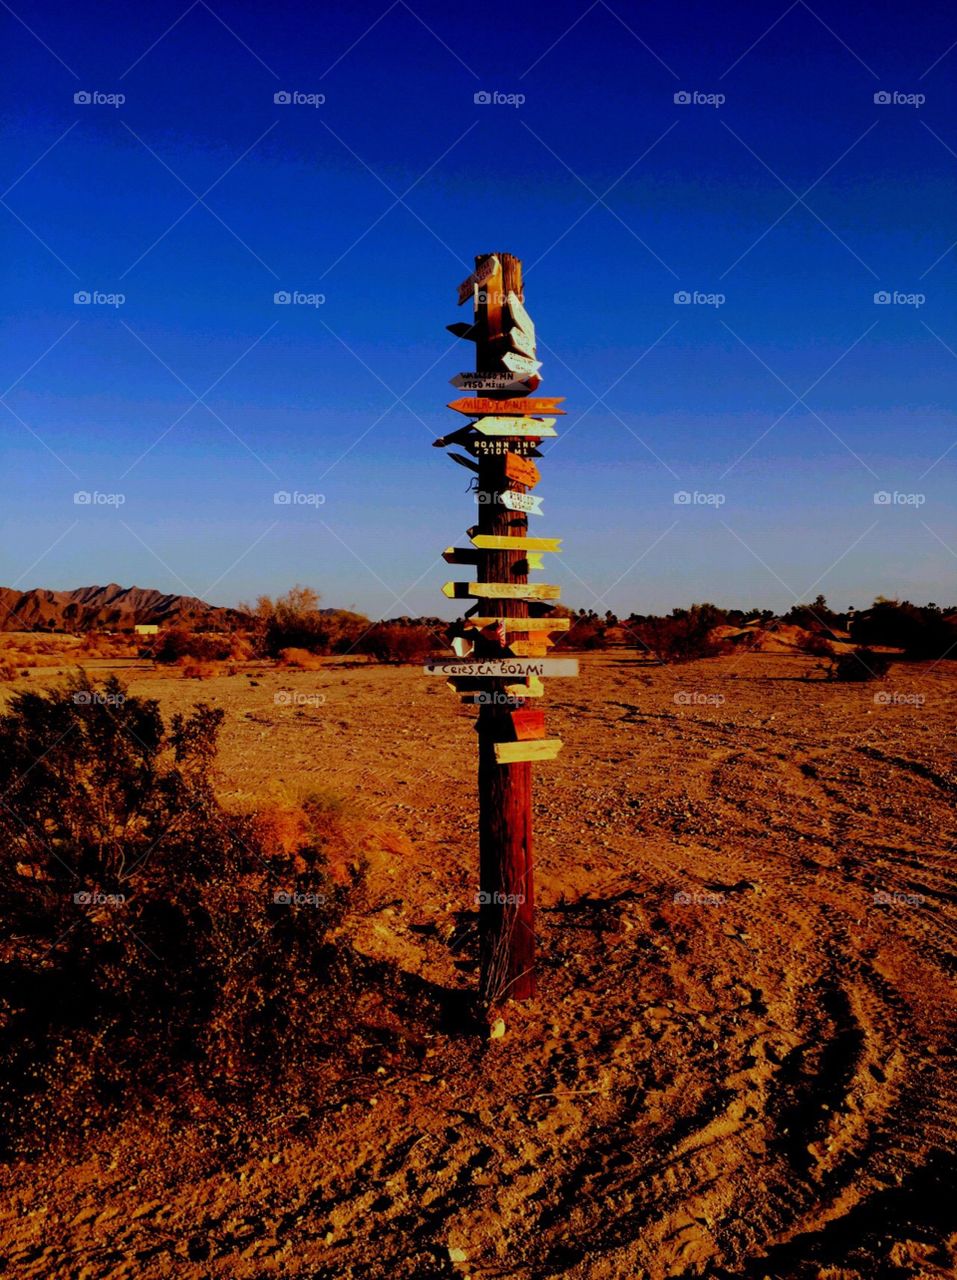 Any which way but here. Any which way but here ( multi sign pole in the desert)